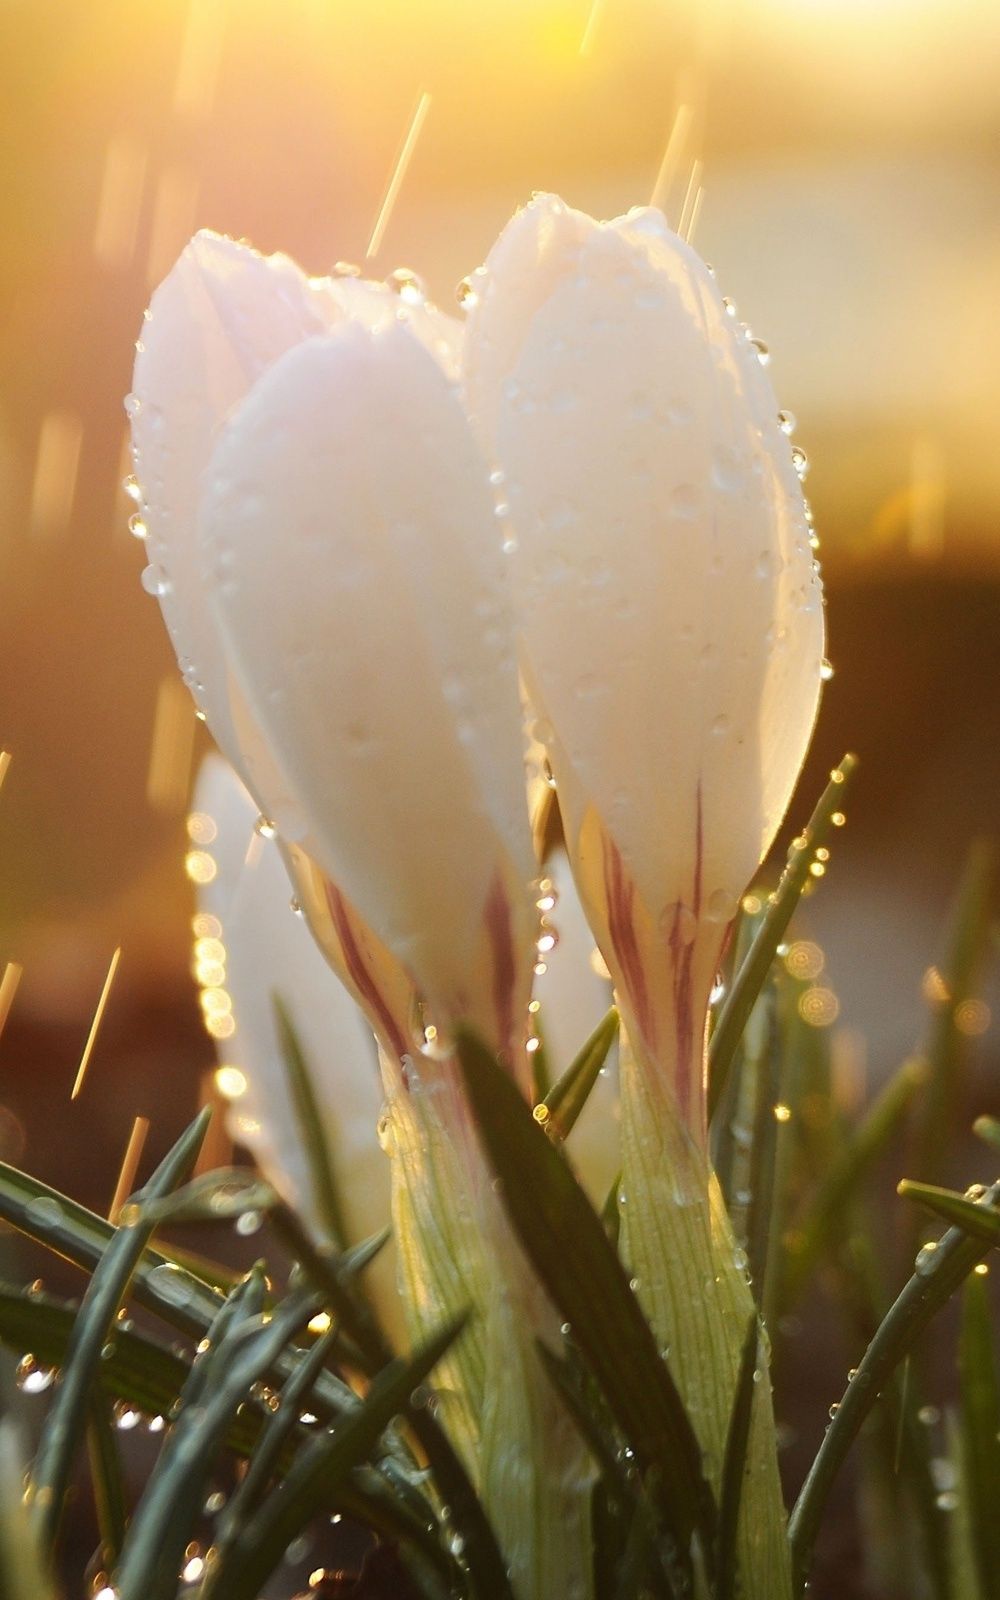 Crocus Flower Close Up Dew Android Wallpaper free download